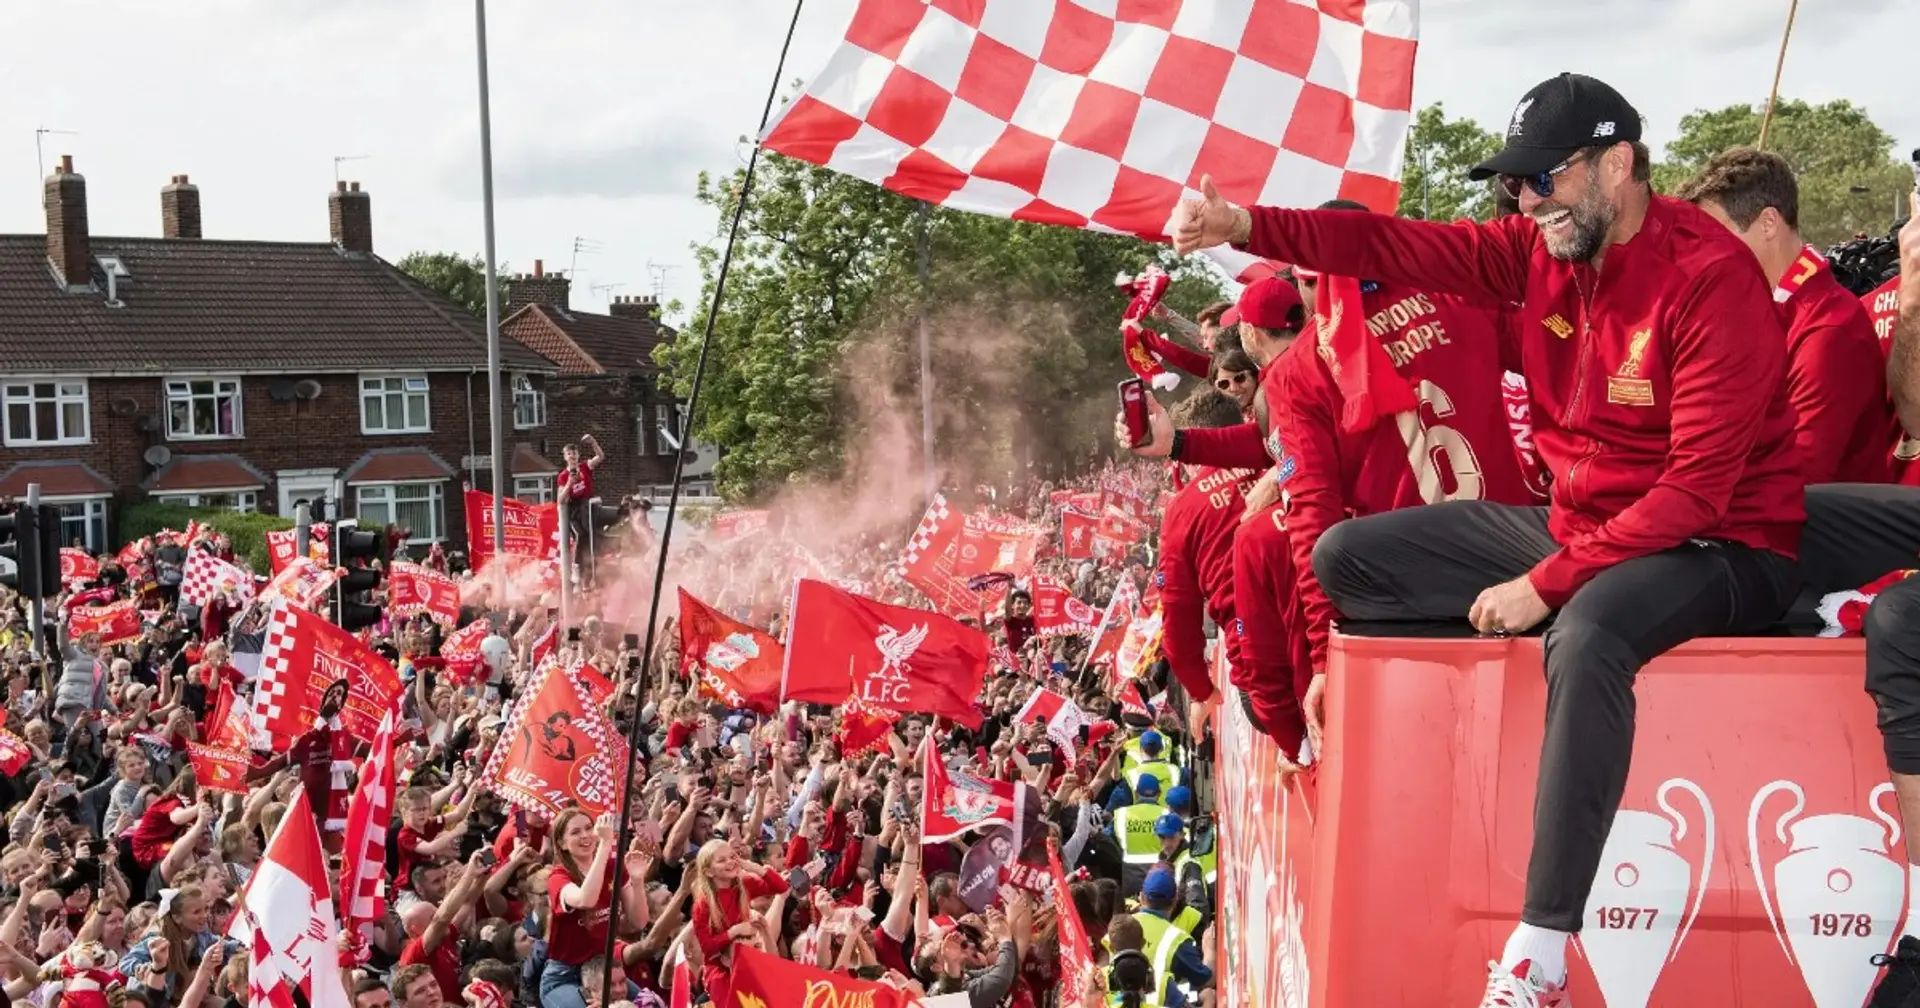 Liverpool won't have end-of-season parade and 2 more big stories you may have missed